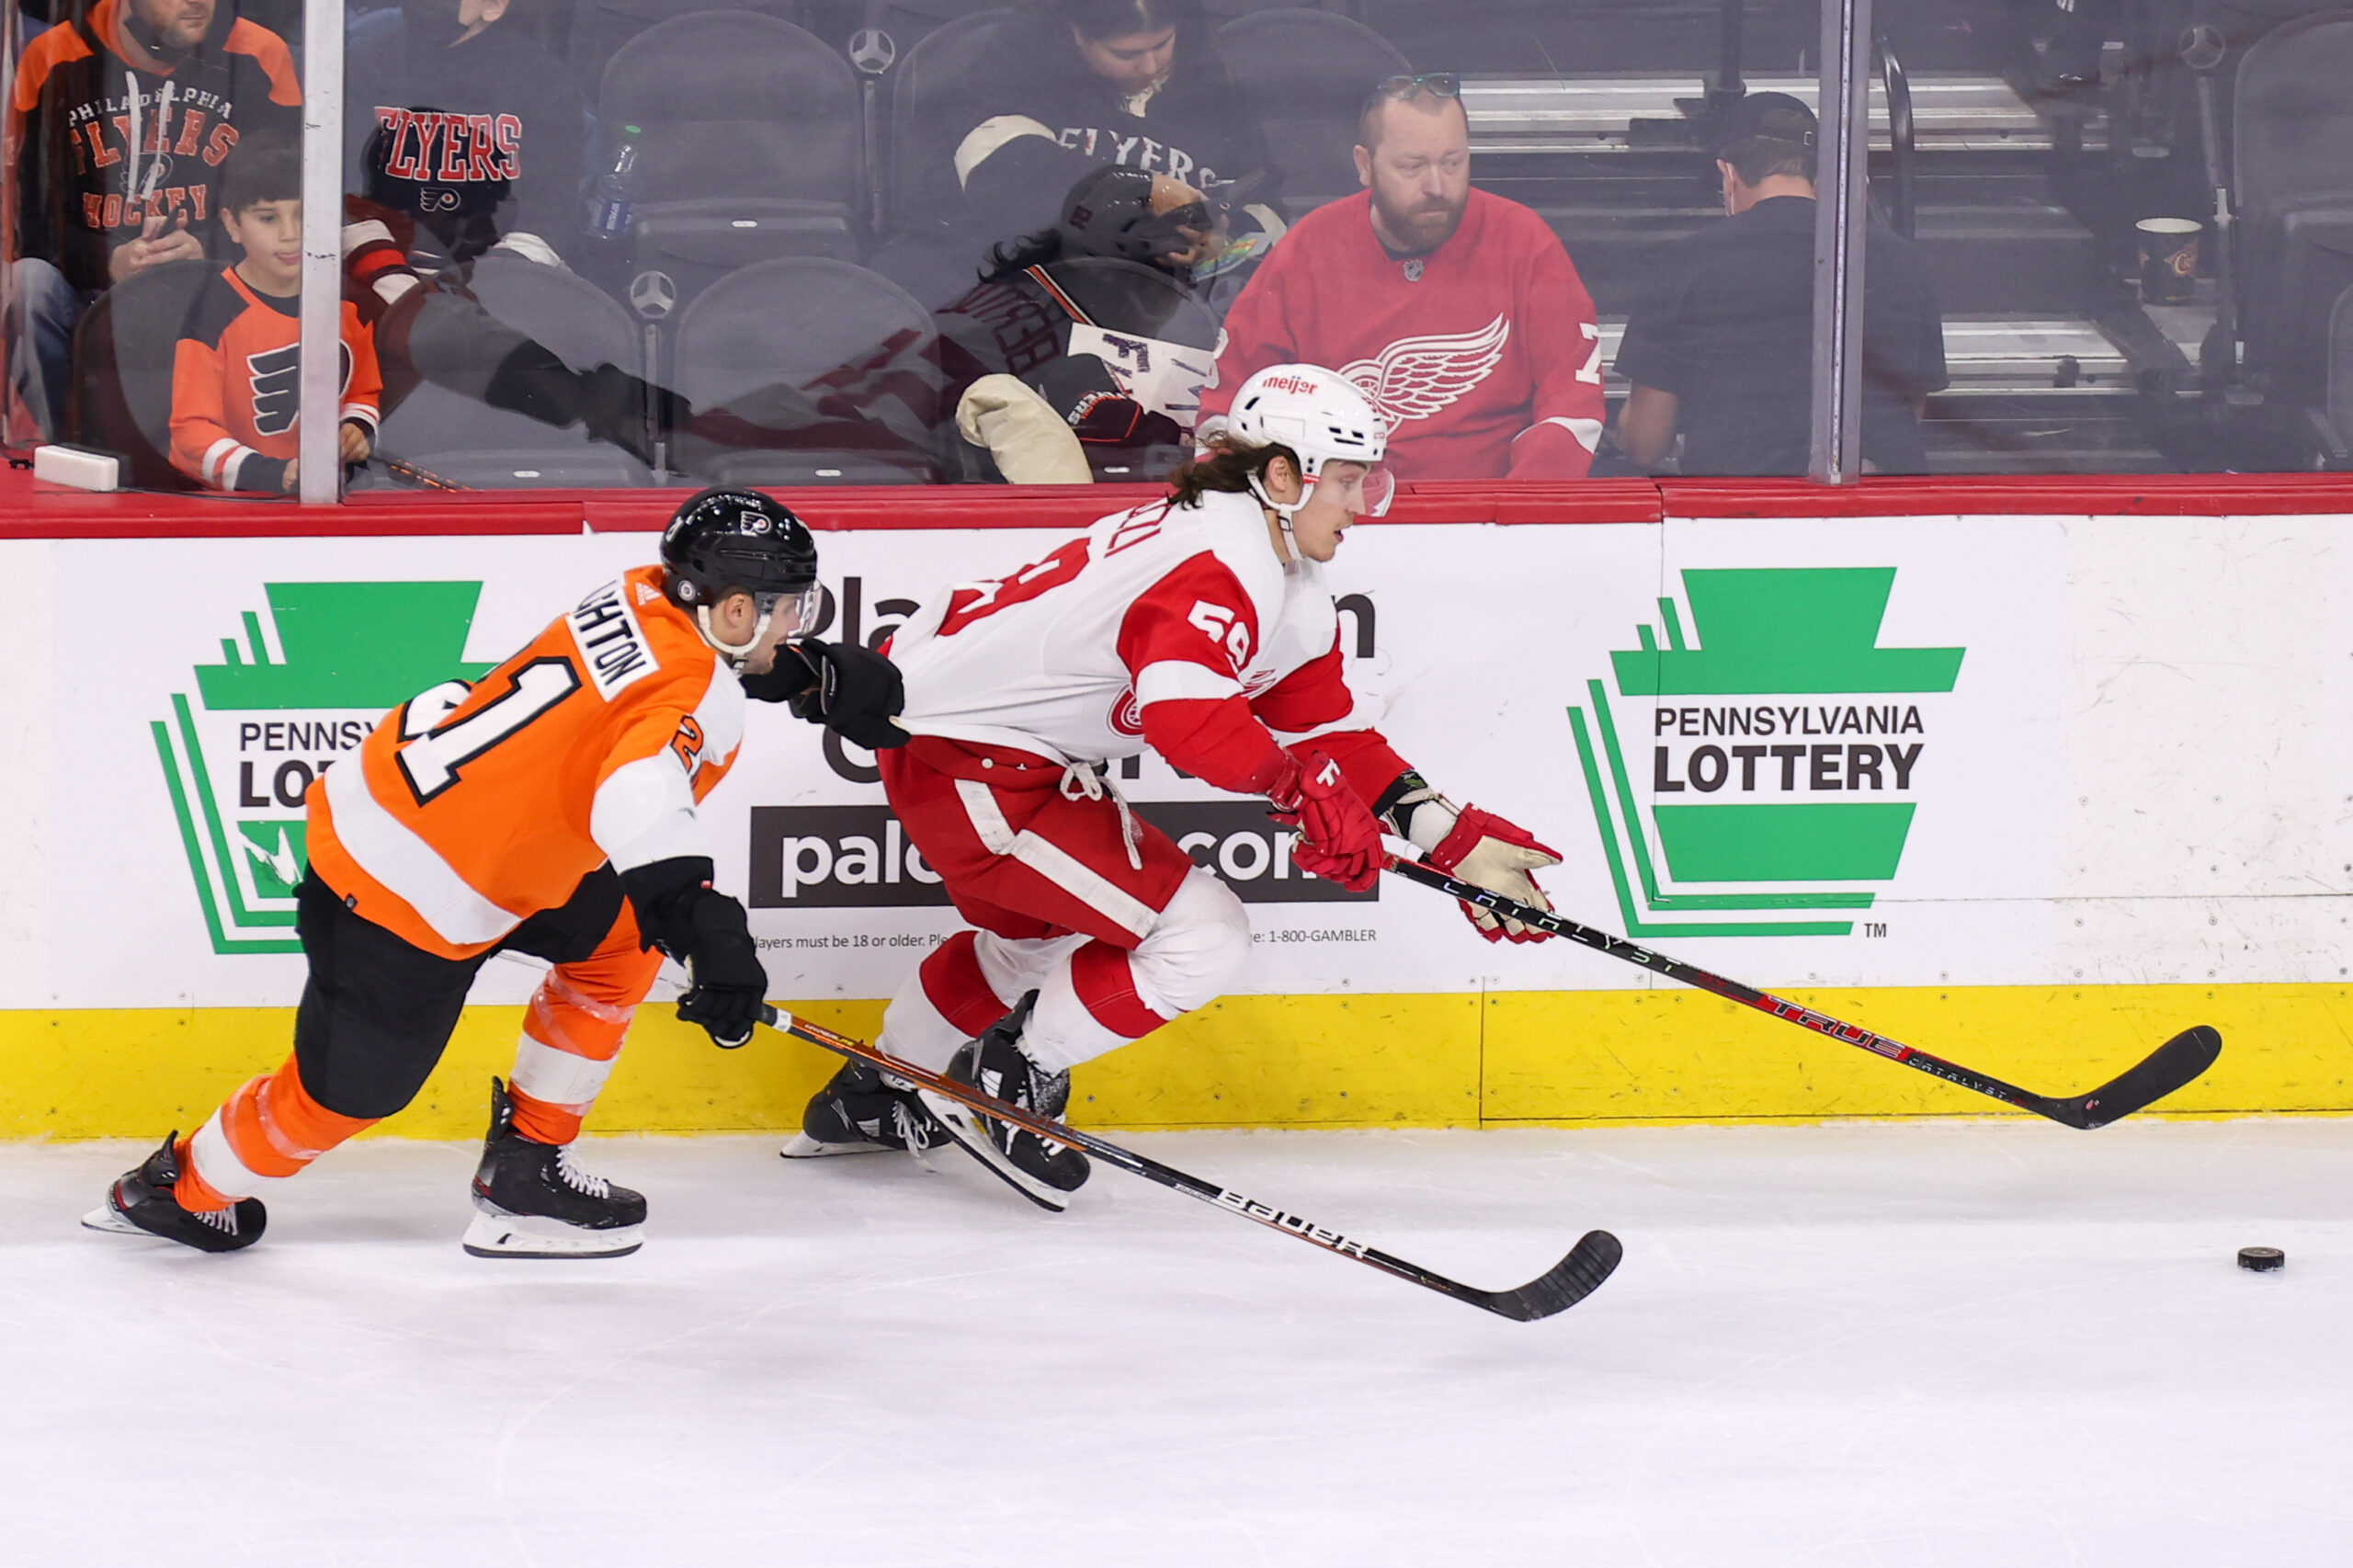 Tyler Bertuzzi out 4-6 weeks after upper-body injury, Red Wings